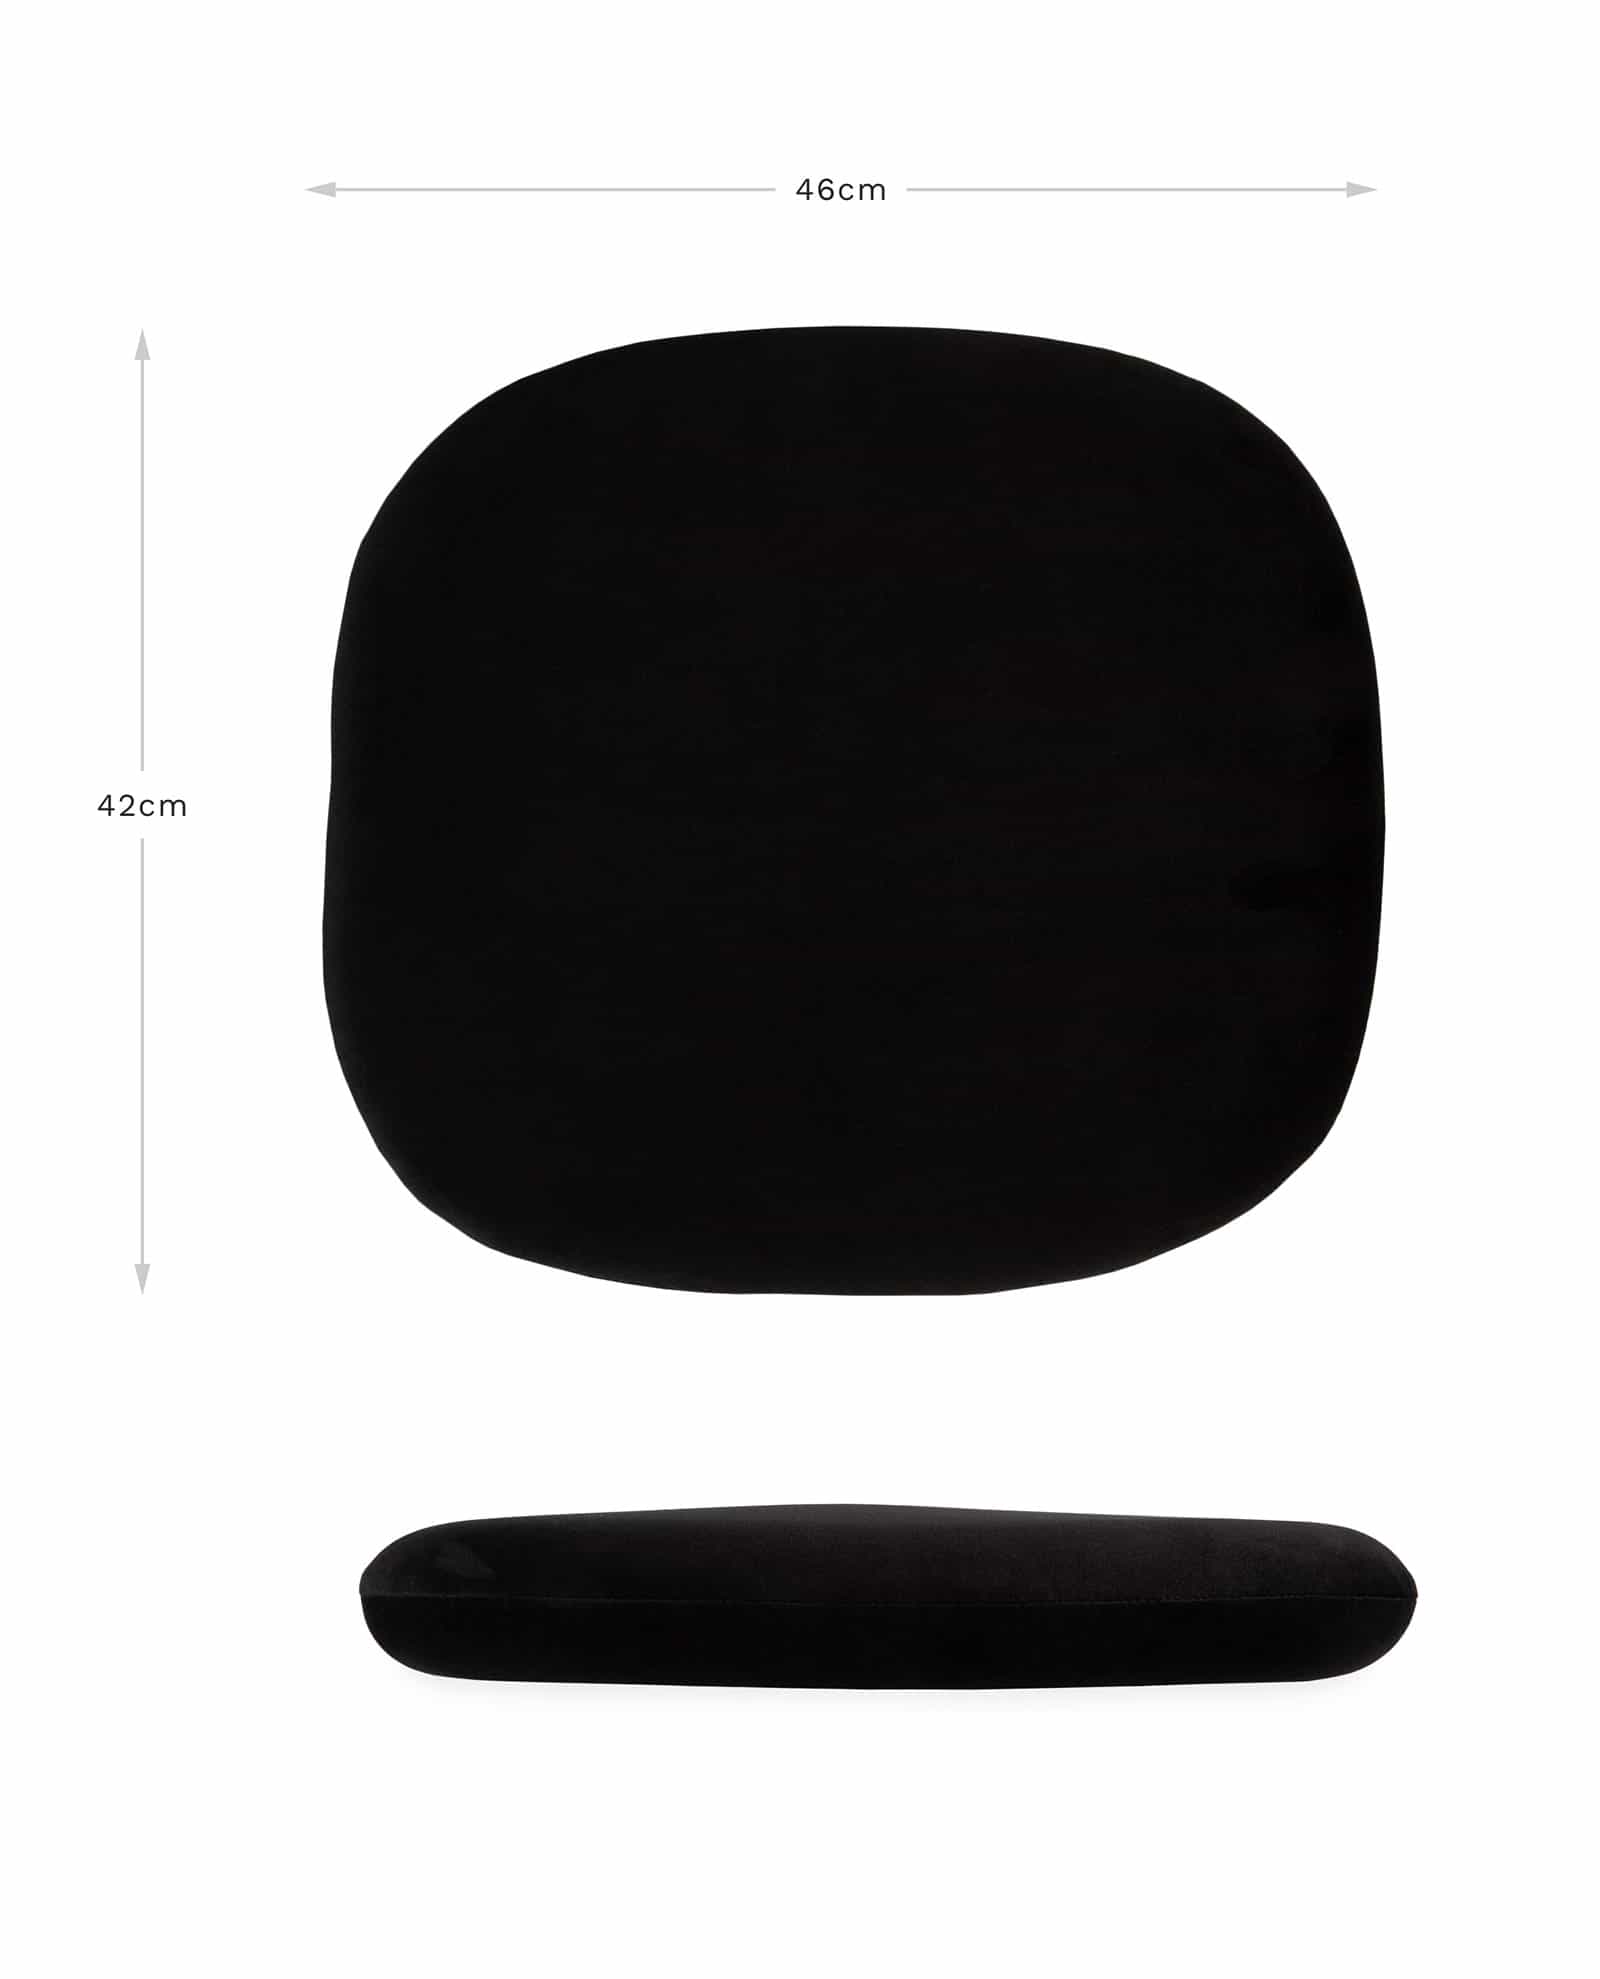 Adjusted for use on mobile or tablet, an image to visually display the profile of the Tulip Side Chair cushions with written dimensions and guide arrows